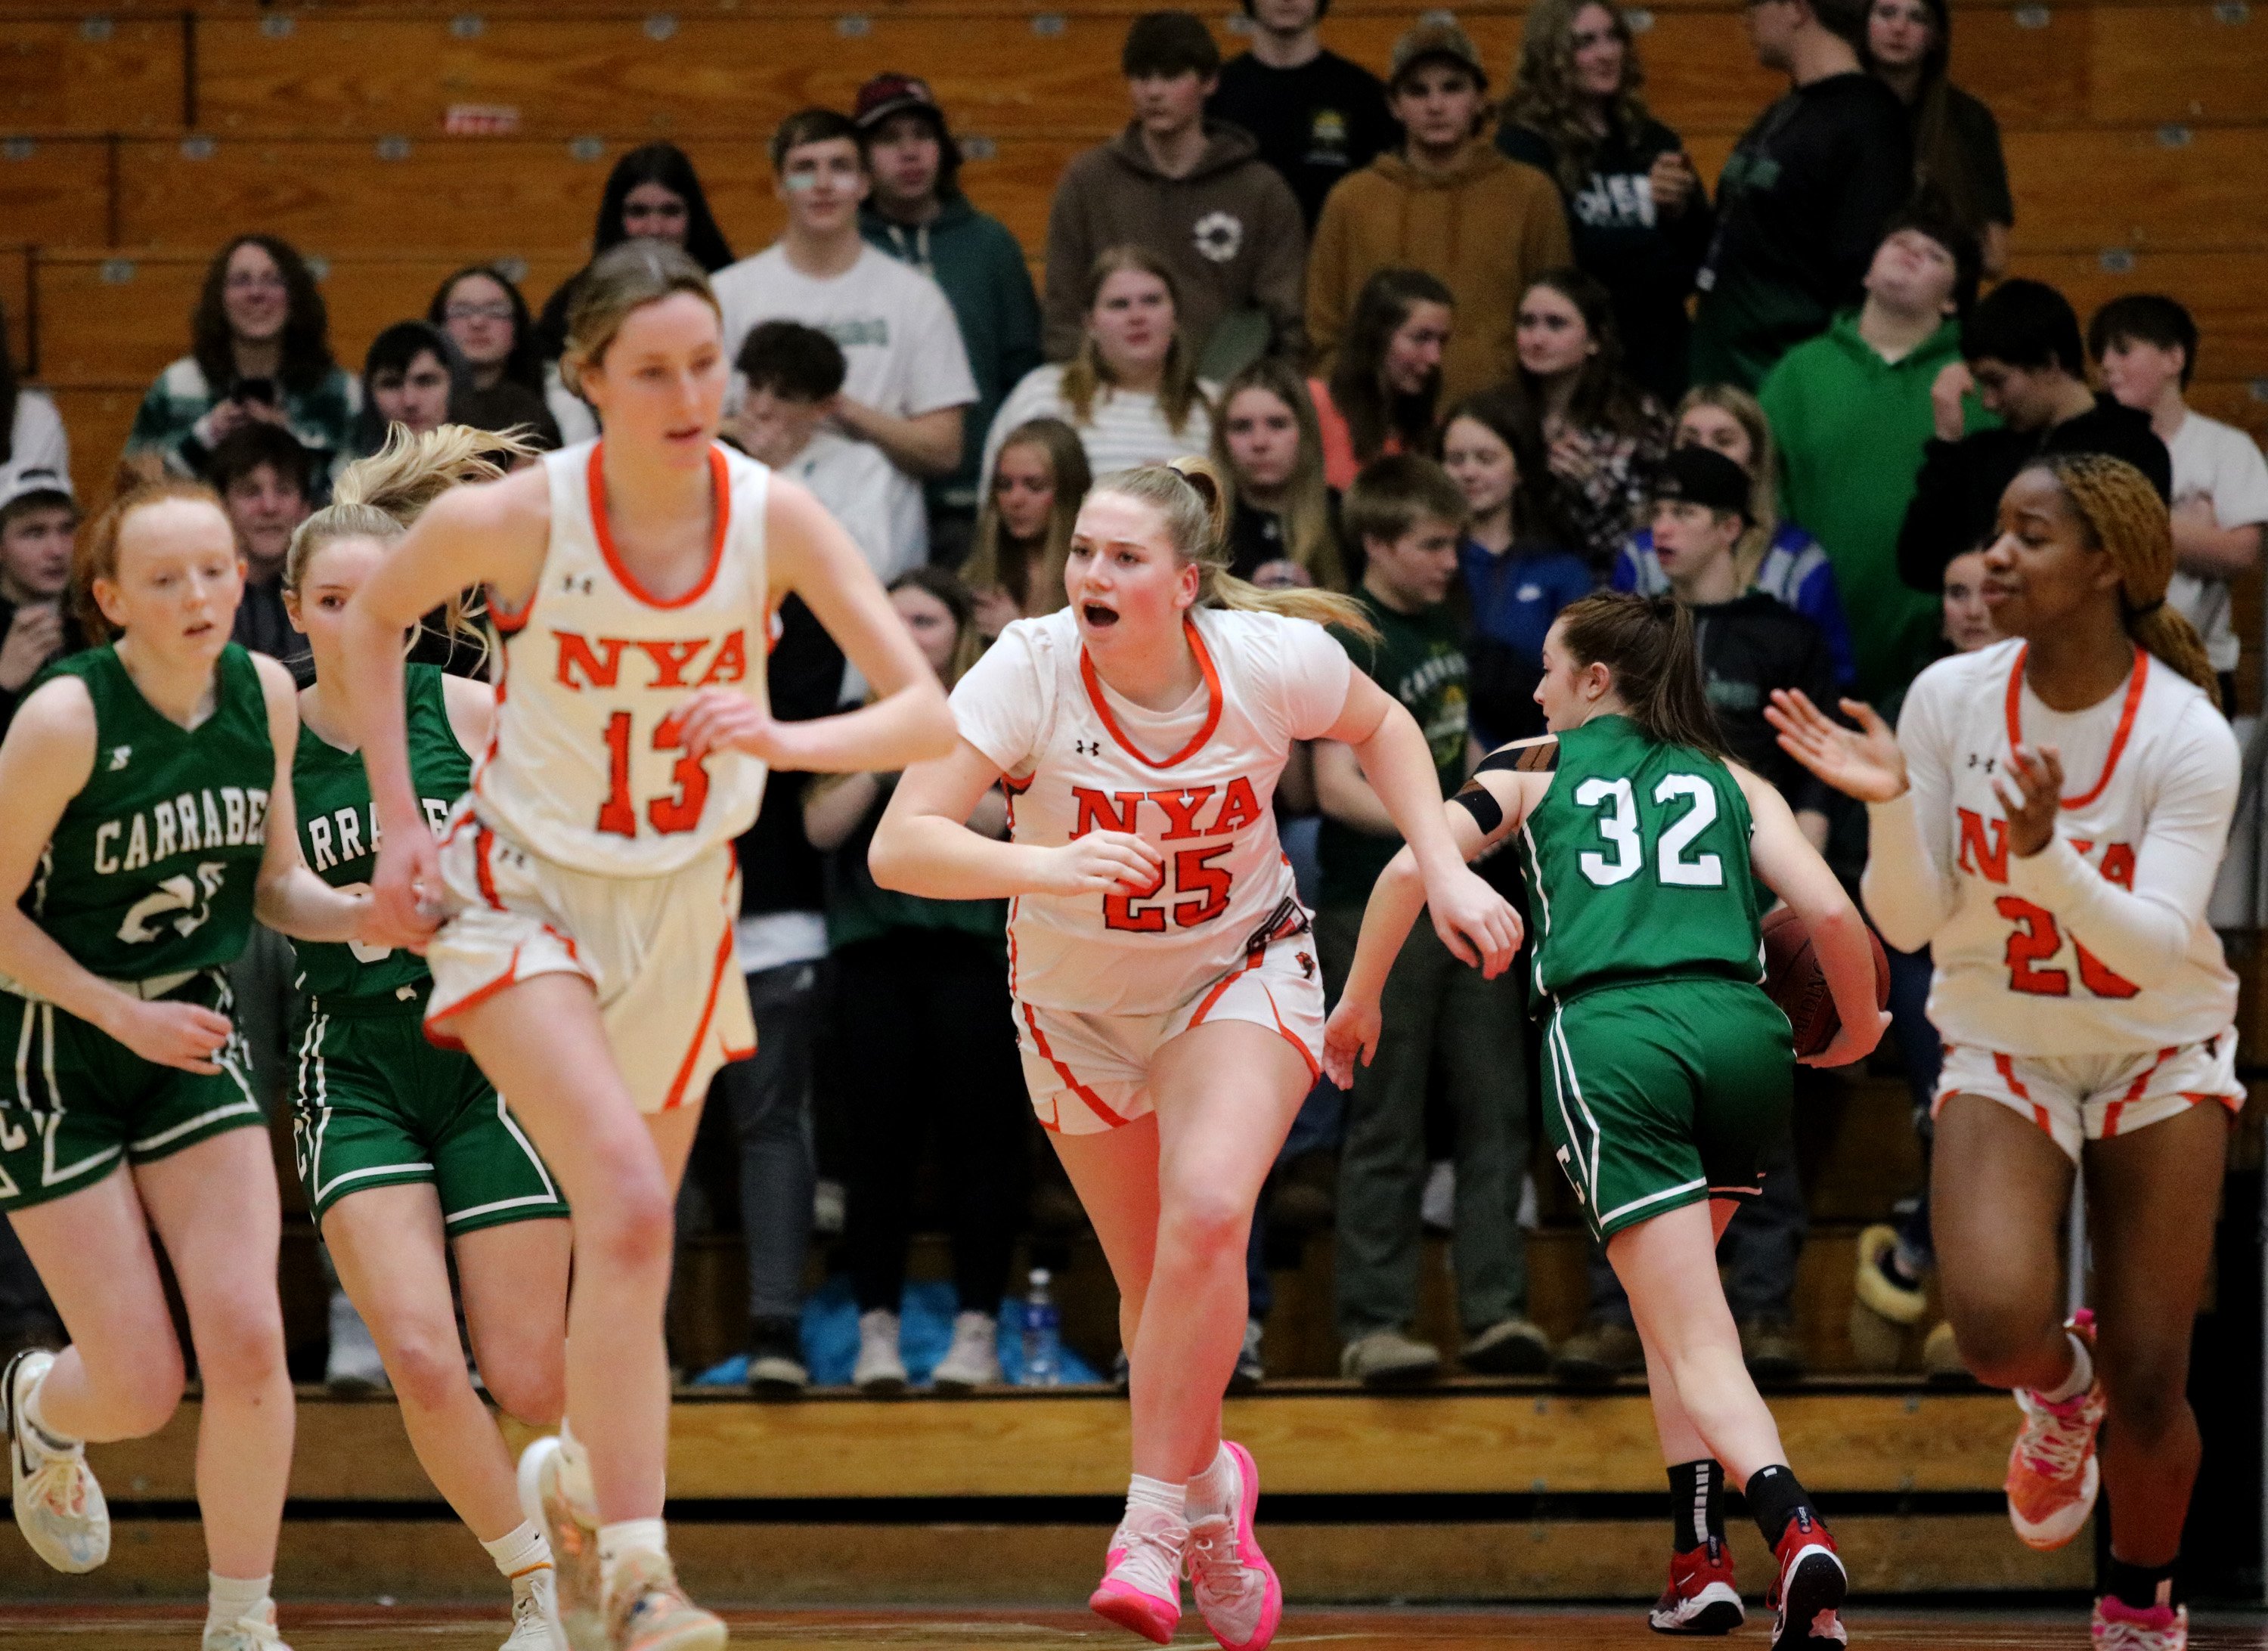 C South girls basketball: NYA does enough to get past Carrabec